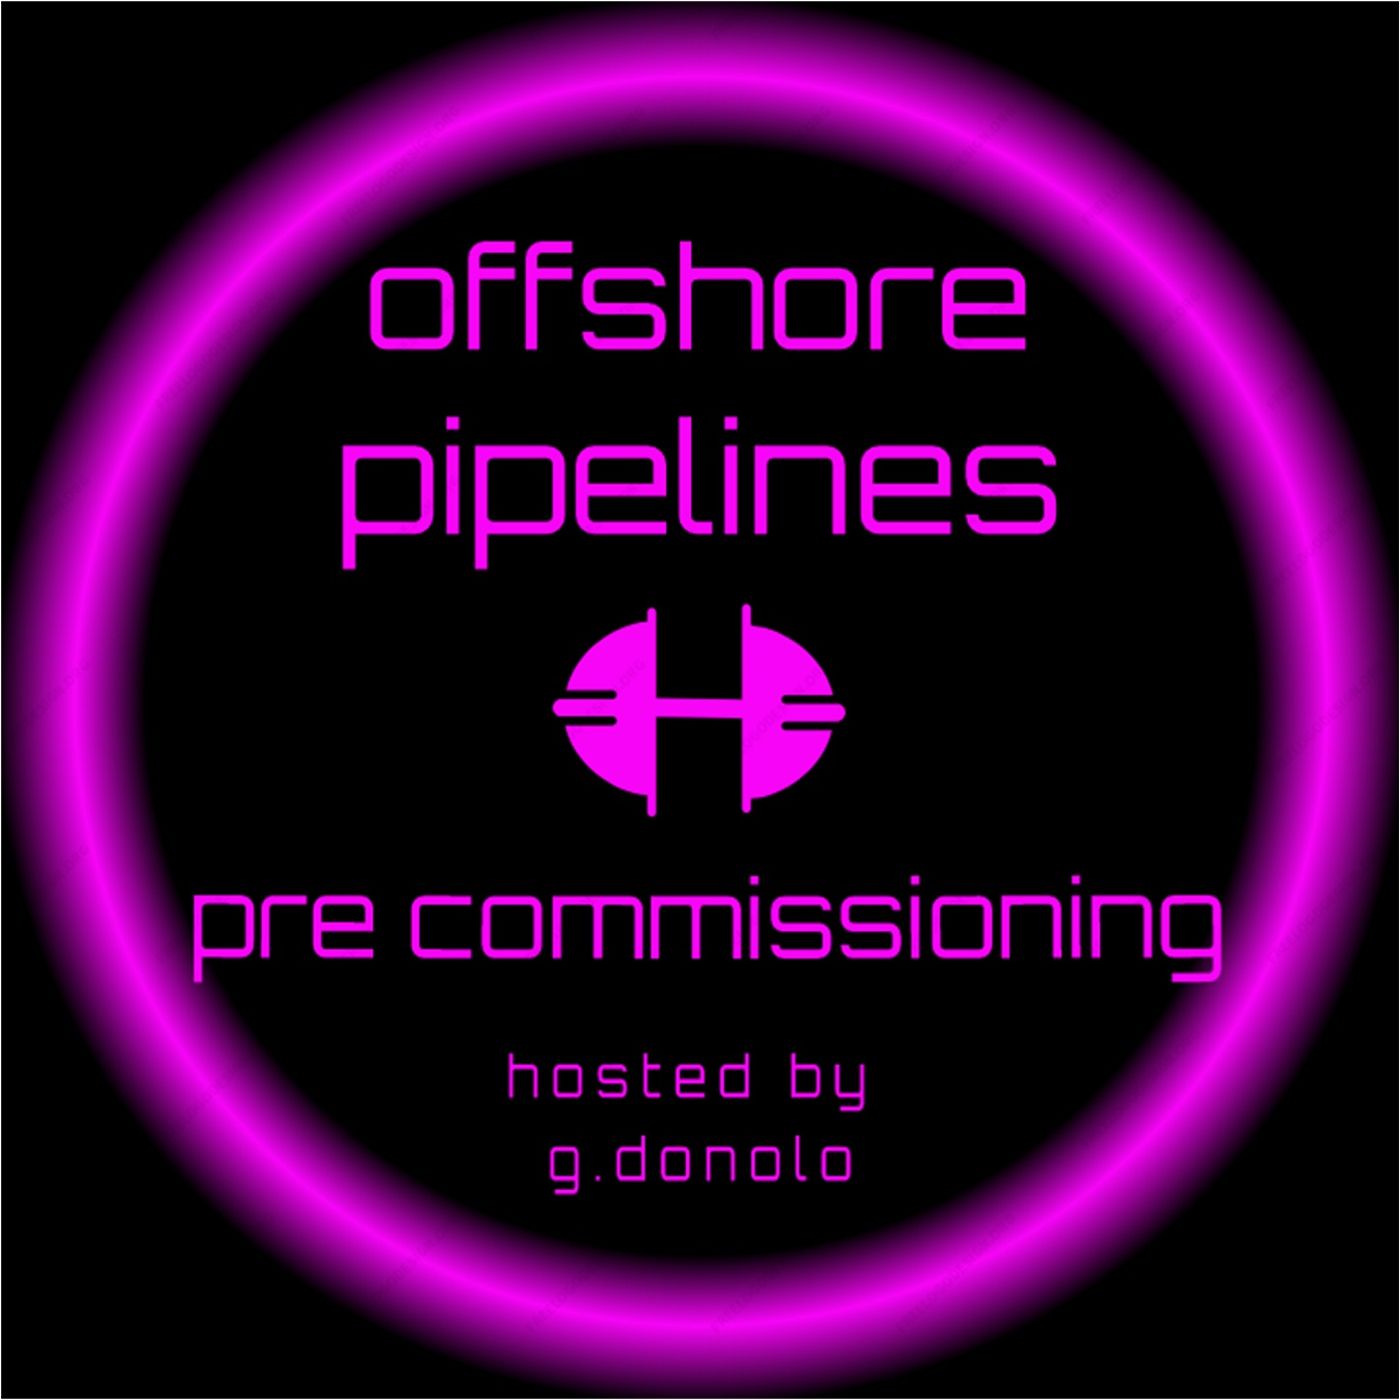 Episode 1 : Pipeline Systems and Definitions